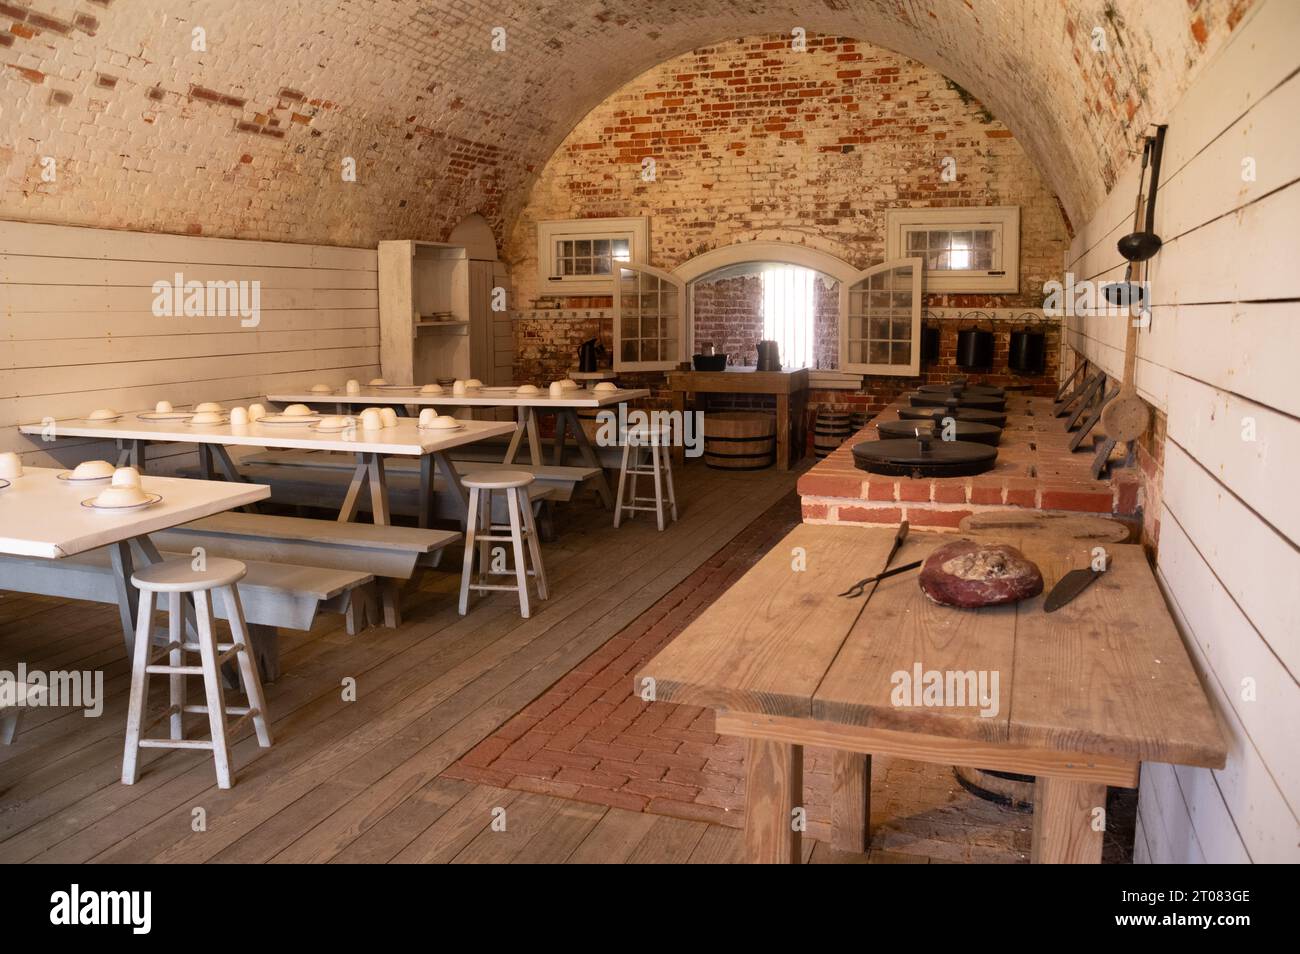 Mess hall/Dining hall at Fort Macon SP, NC Stock Photo